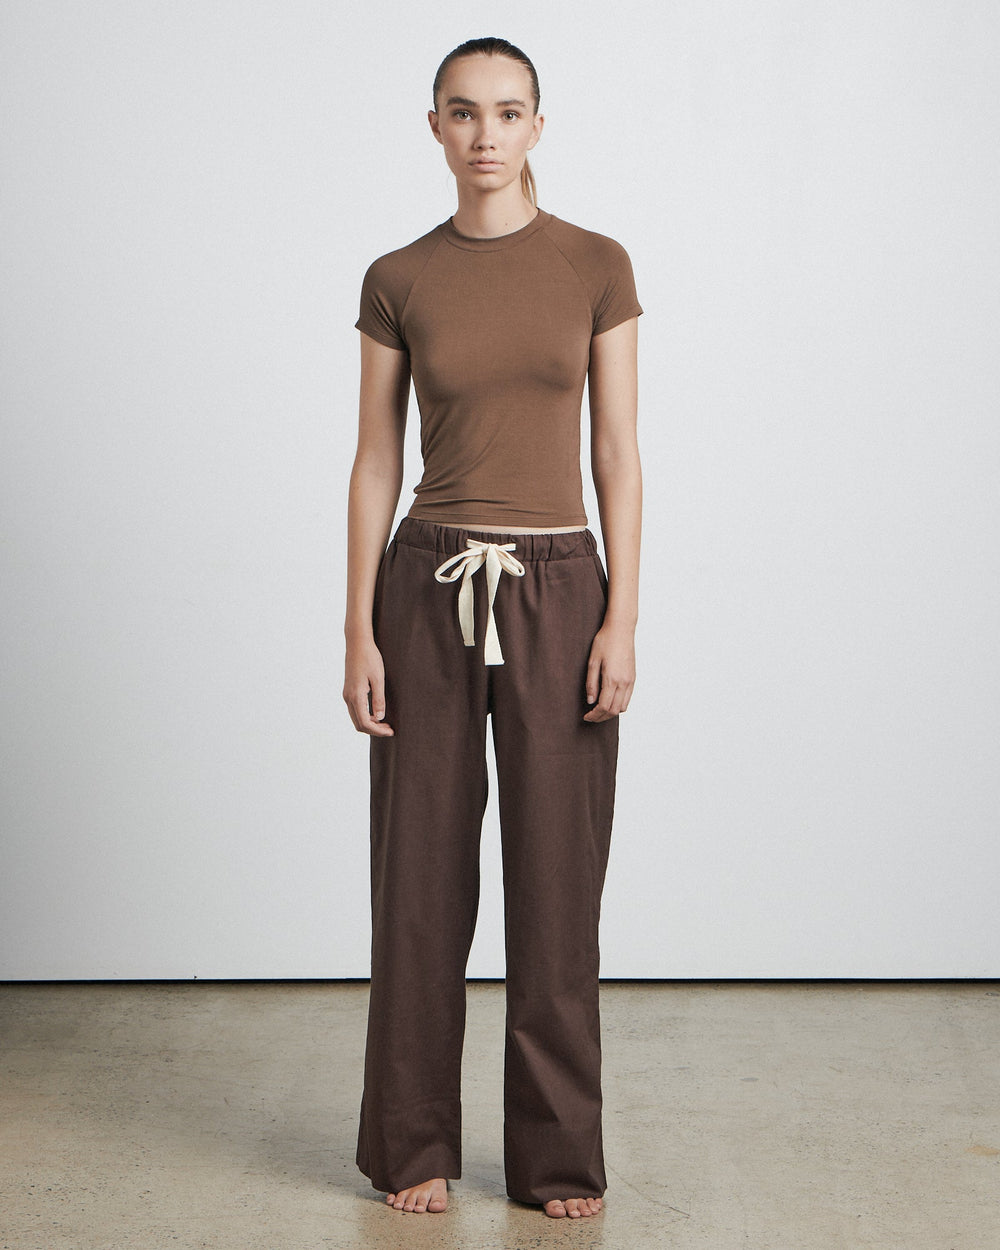 The Mid Rise Drawercord Pant